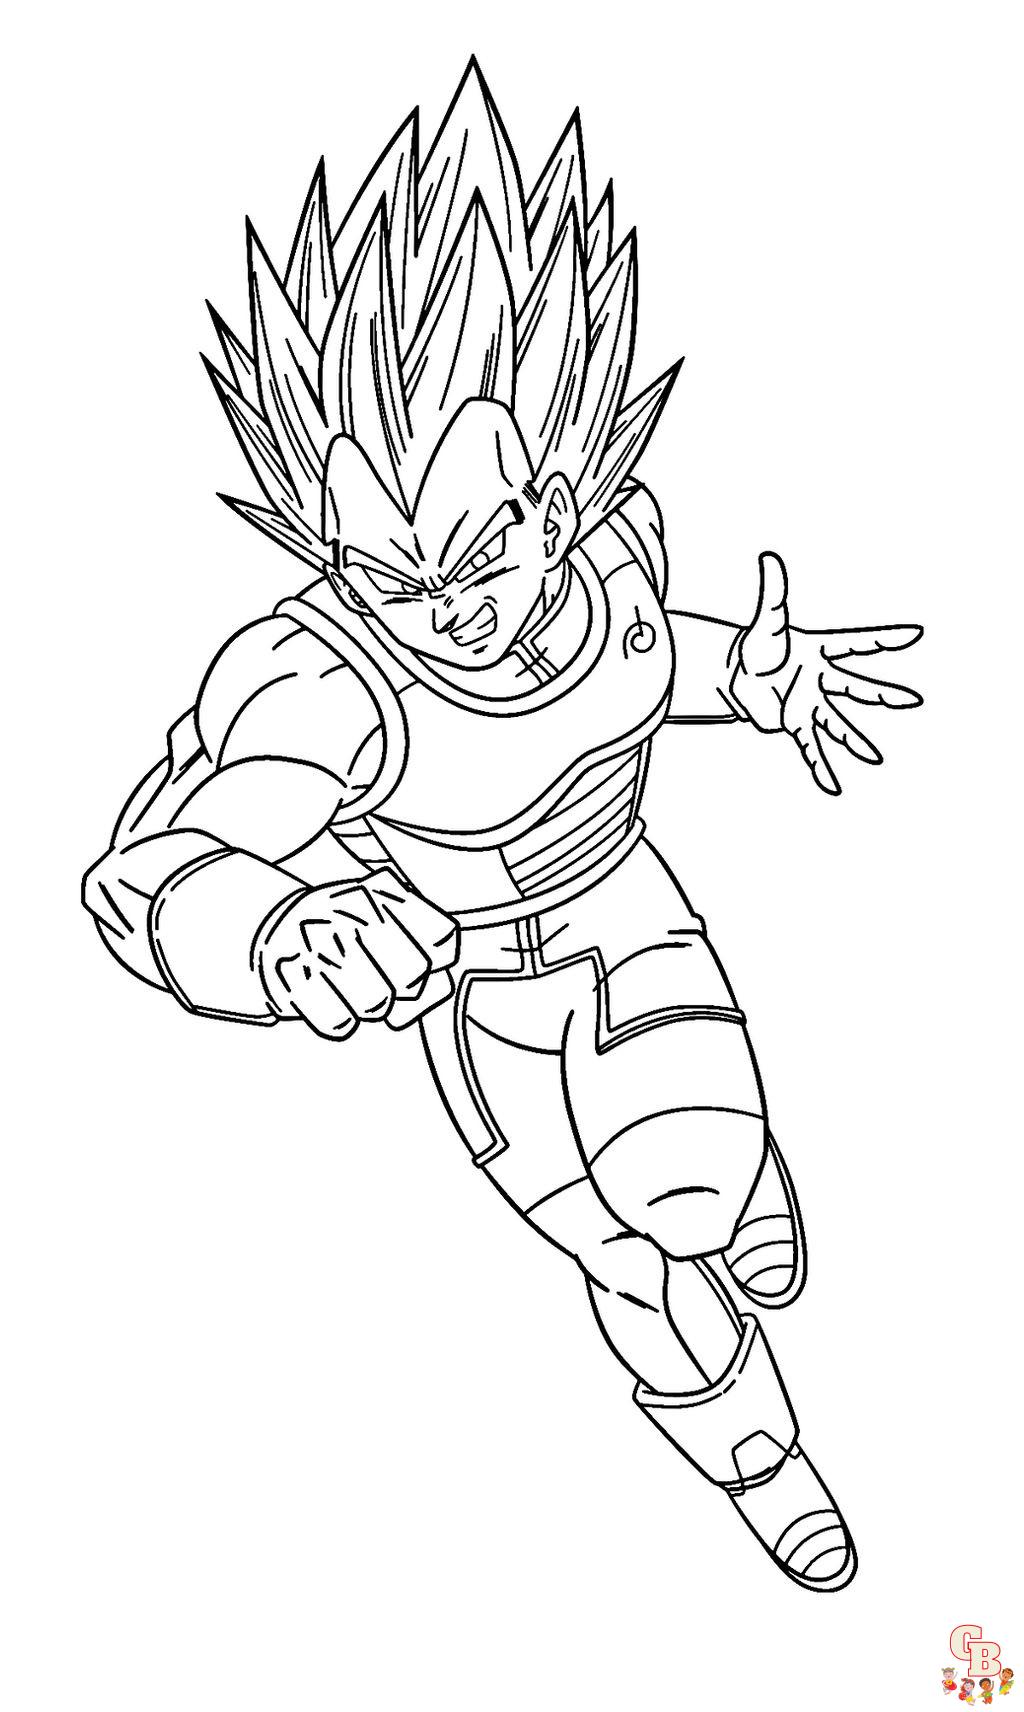 Unleash your creativity with vegeta dragon ball z coloring pages